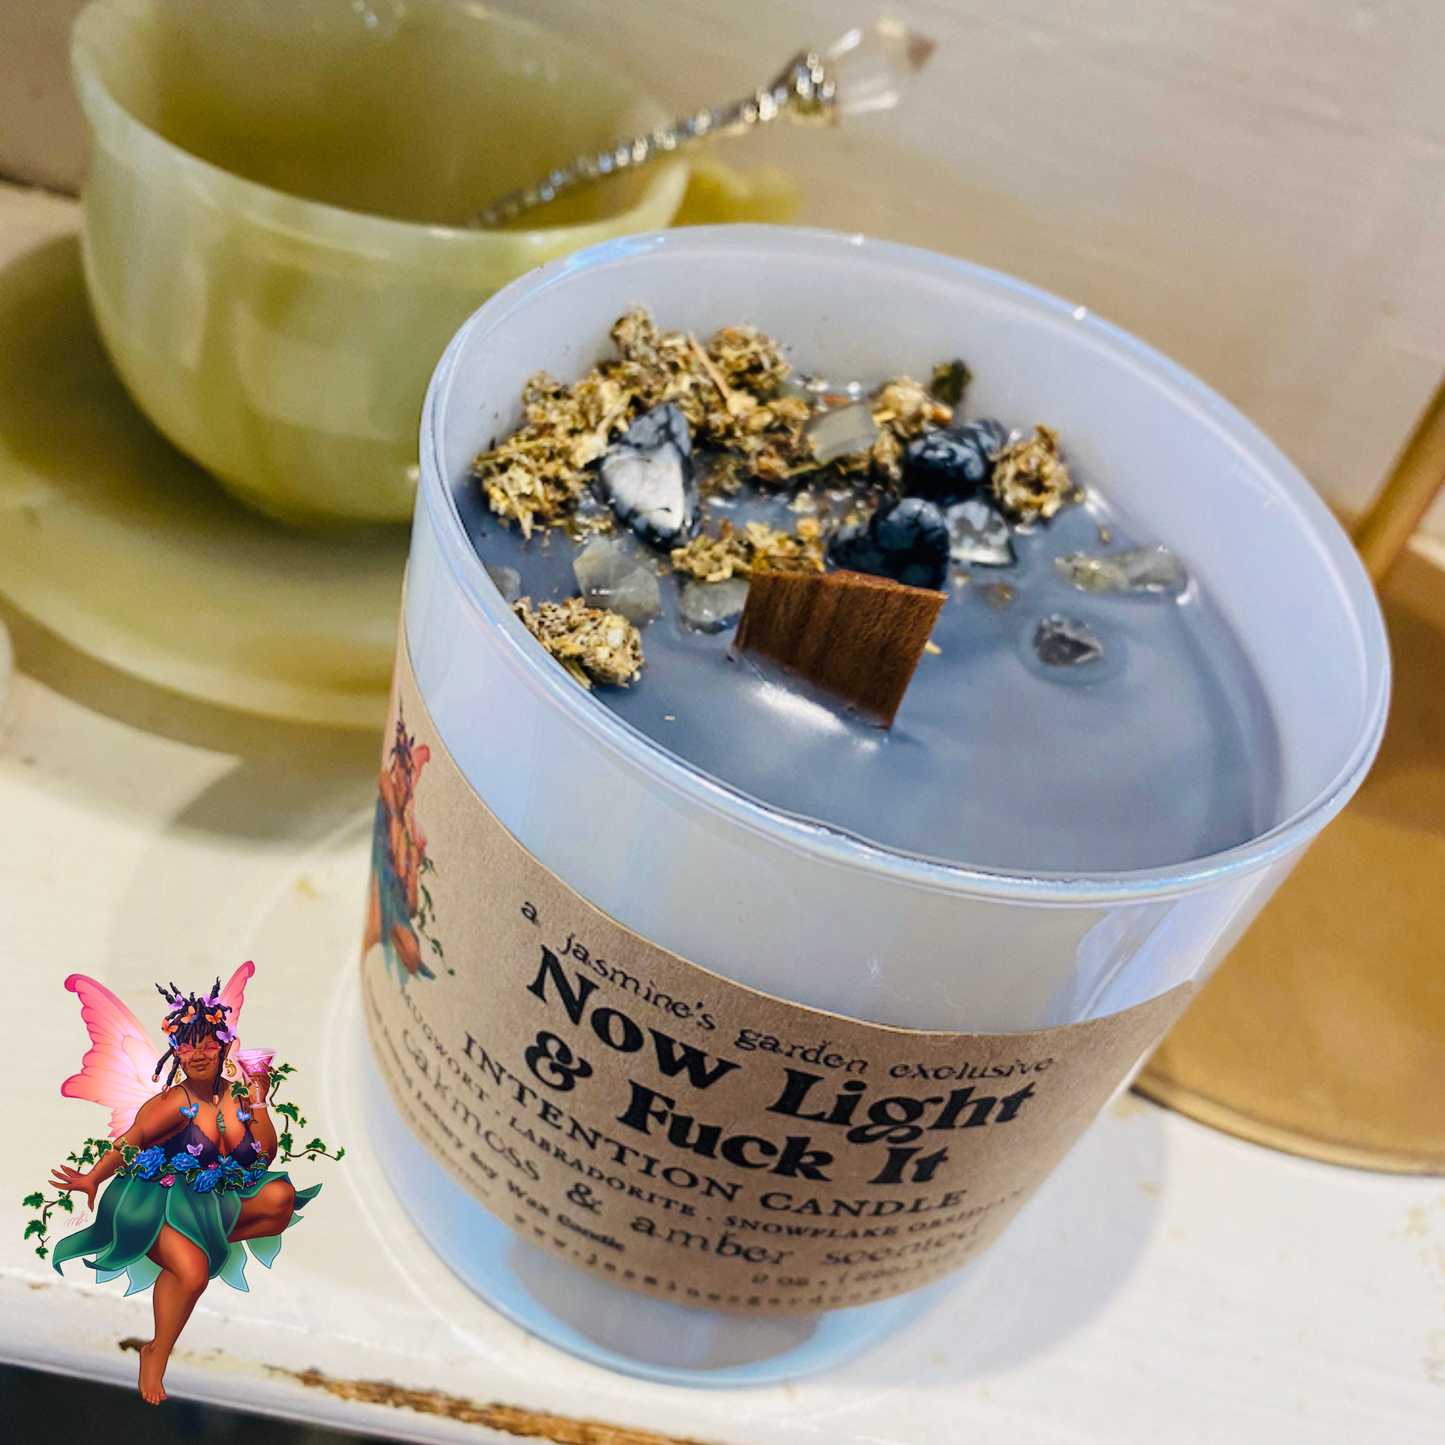 Now Light & F*ck It Organic Coconut Soy Wax Intention Candle - 9 oz